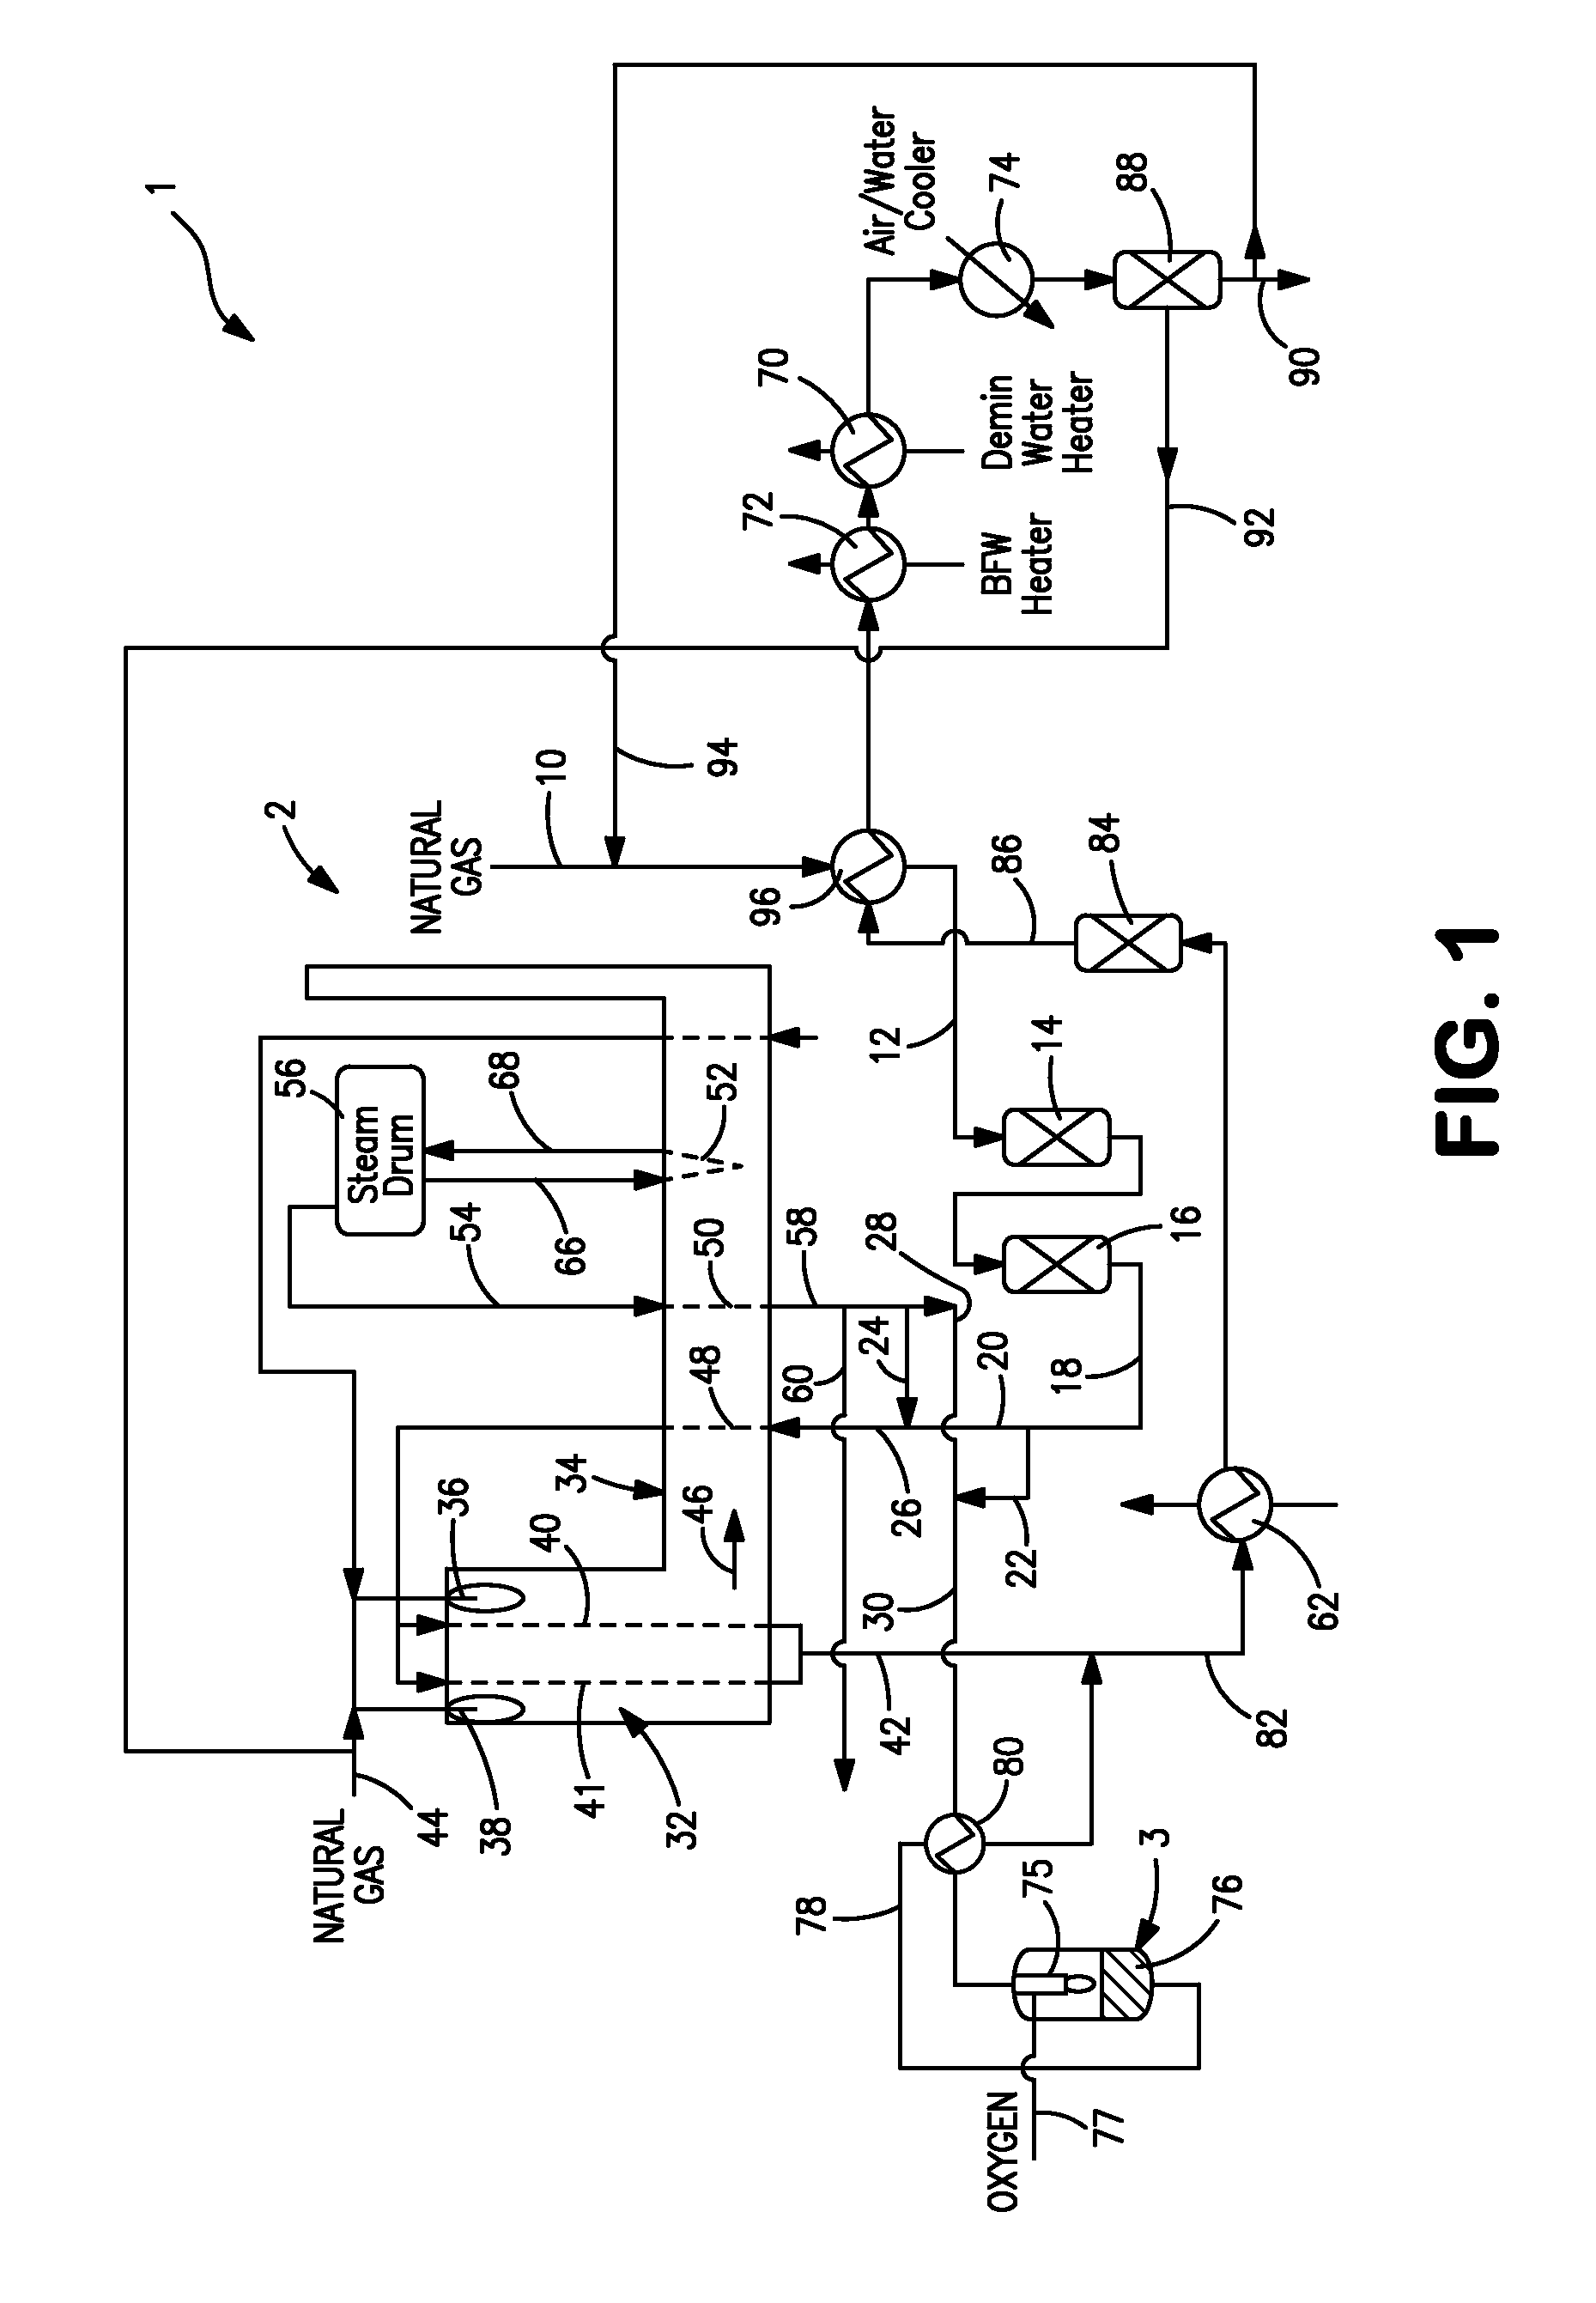 Hydrogen product method and apparatus